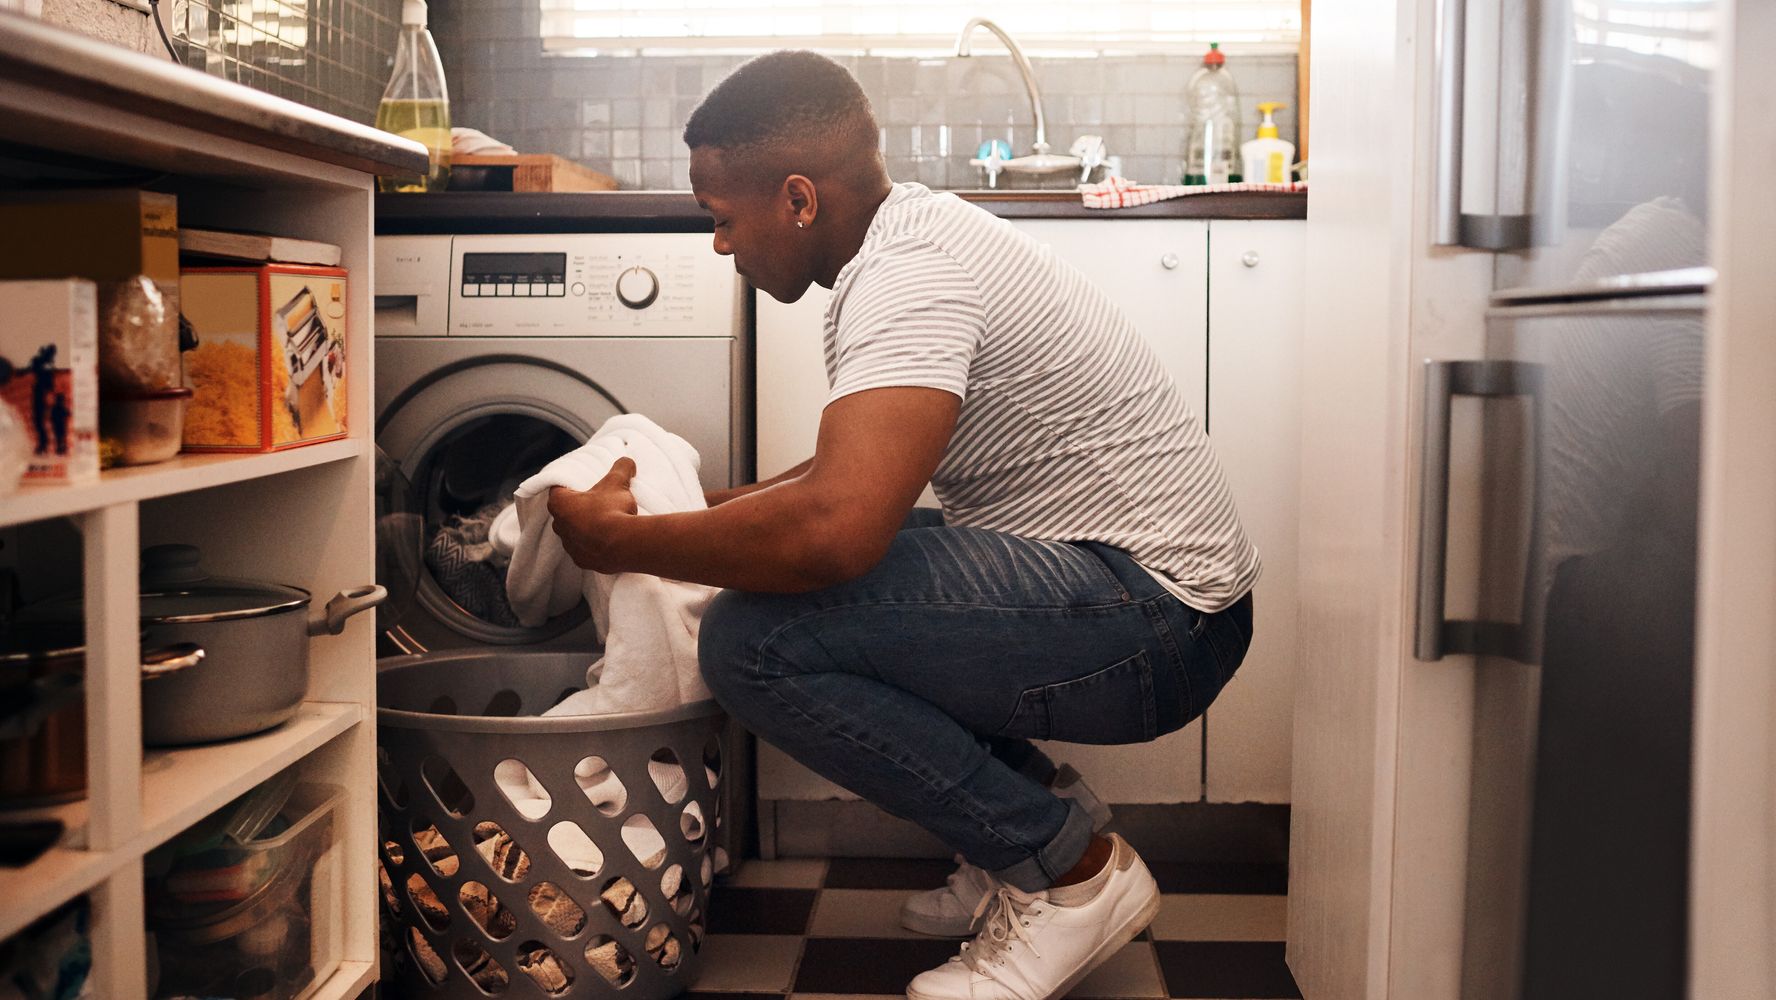 You're Doing Your Laundry Wrong: 7 Tips to Clean Clothes More Expertly - WSJ